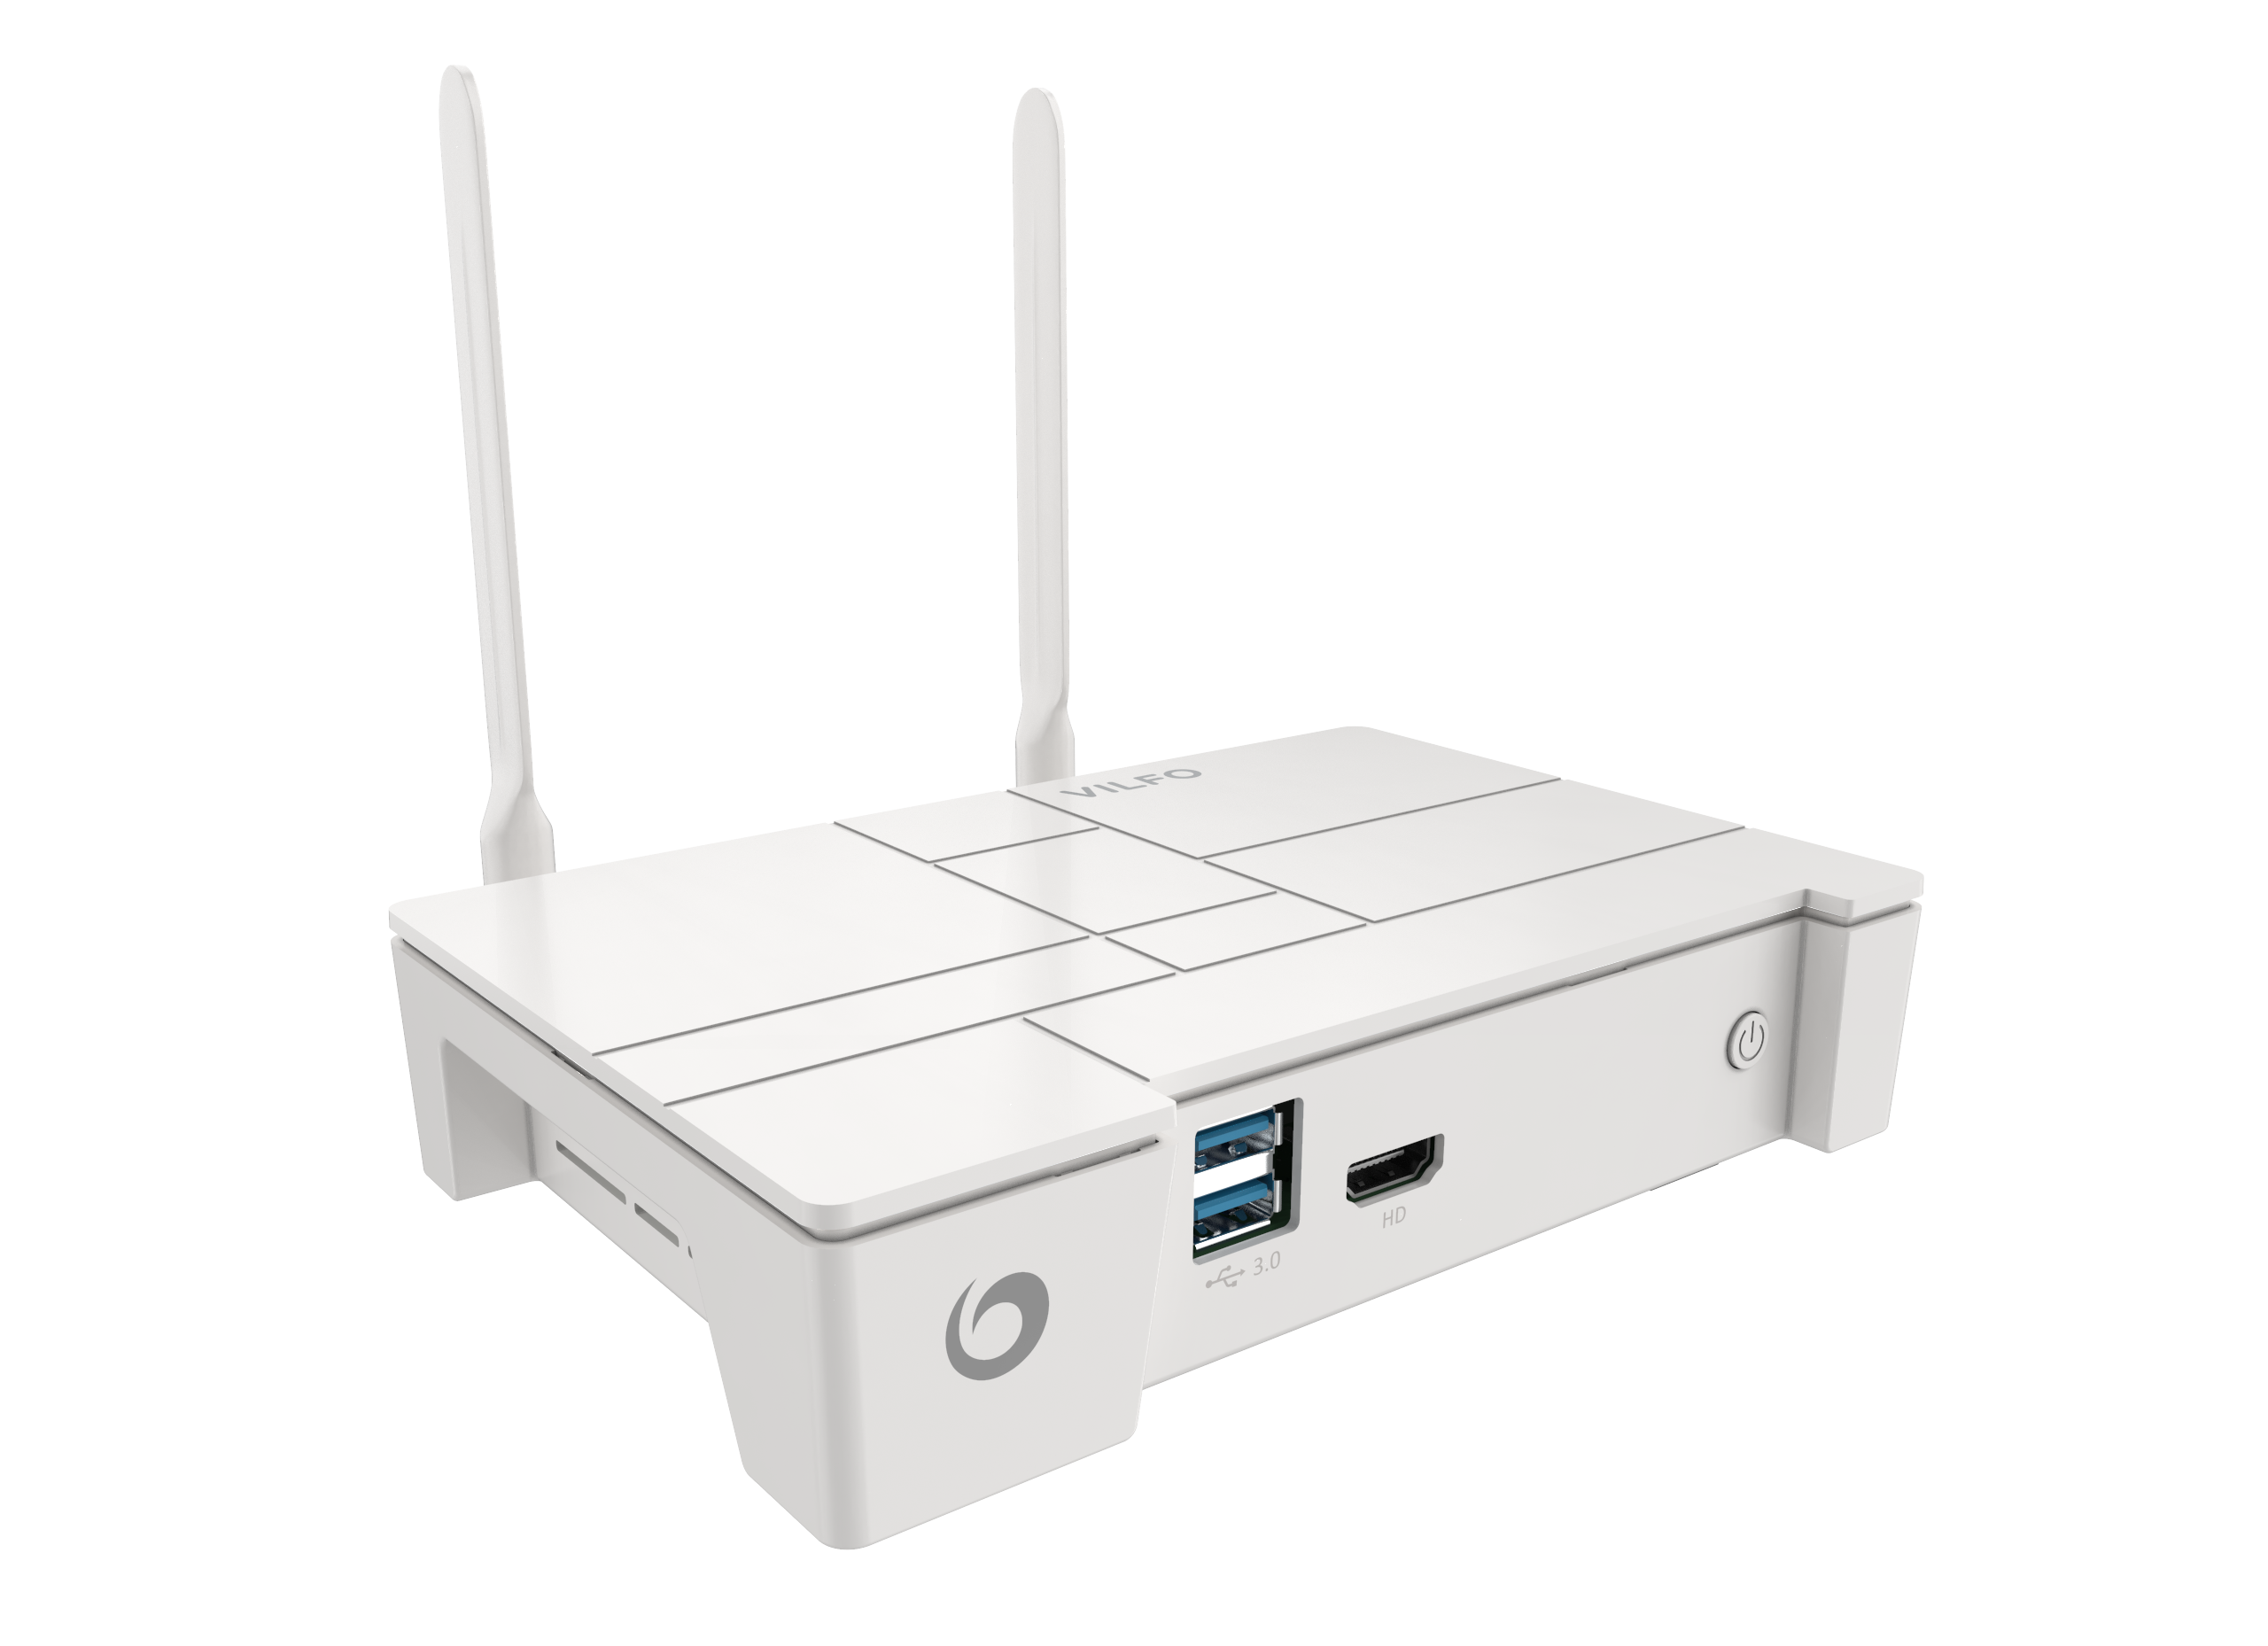 Picture of a Vilfo VPN router